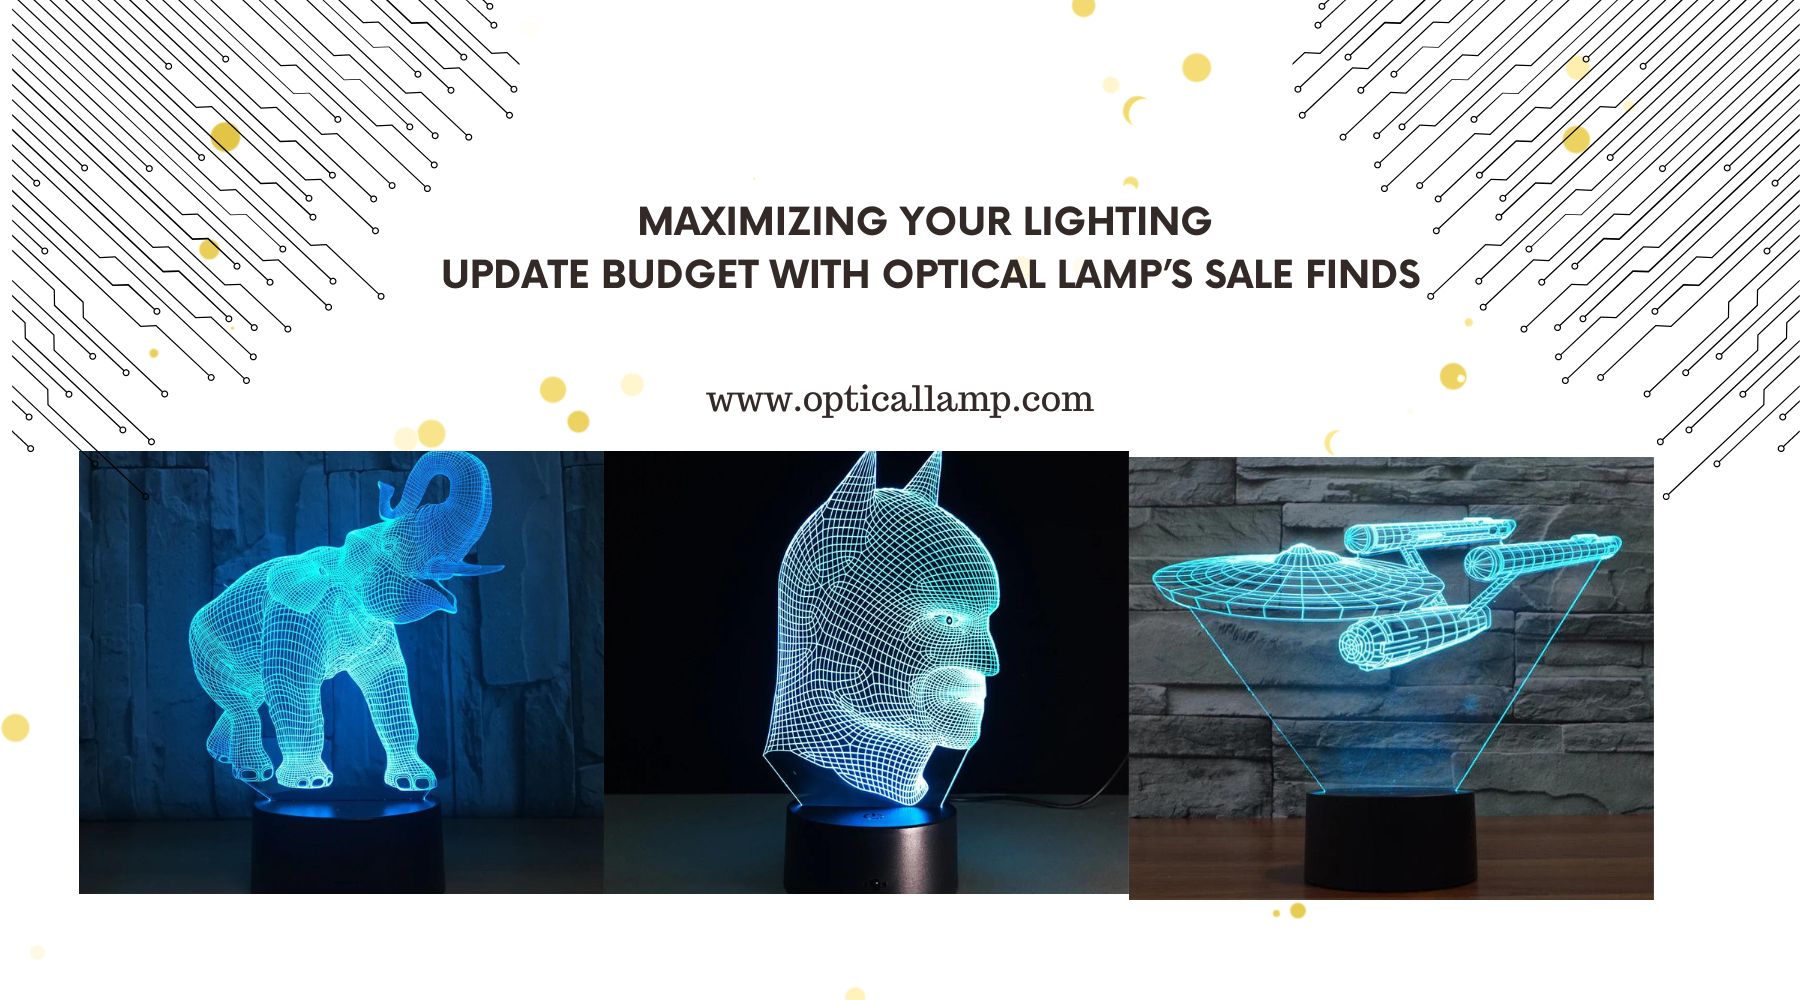 Maximizing Your Lighting Update Budget with Optical Lamp’s Sale Finds